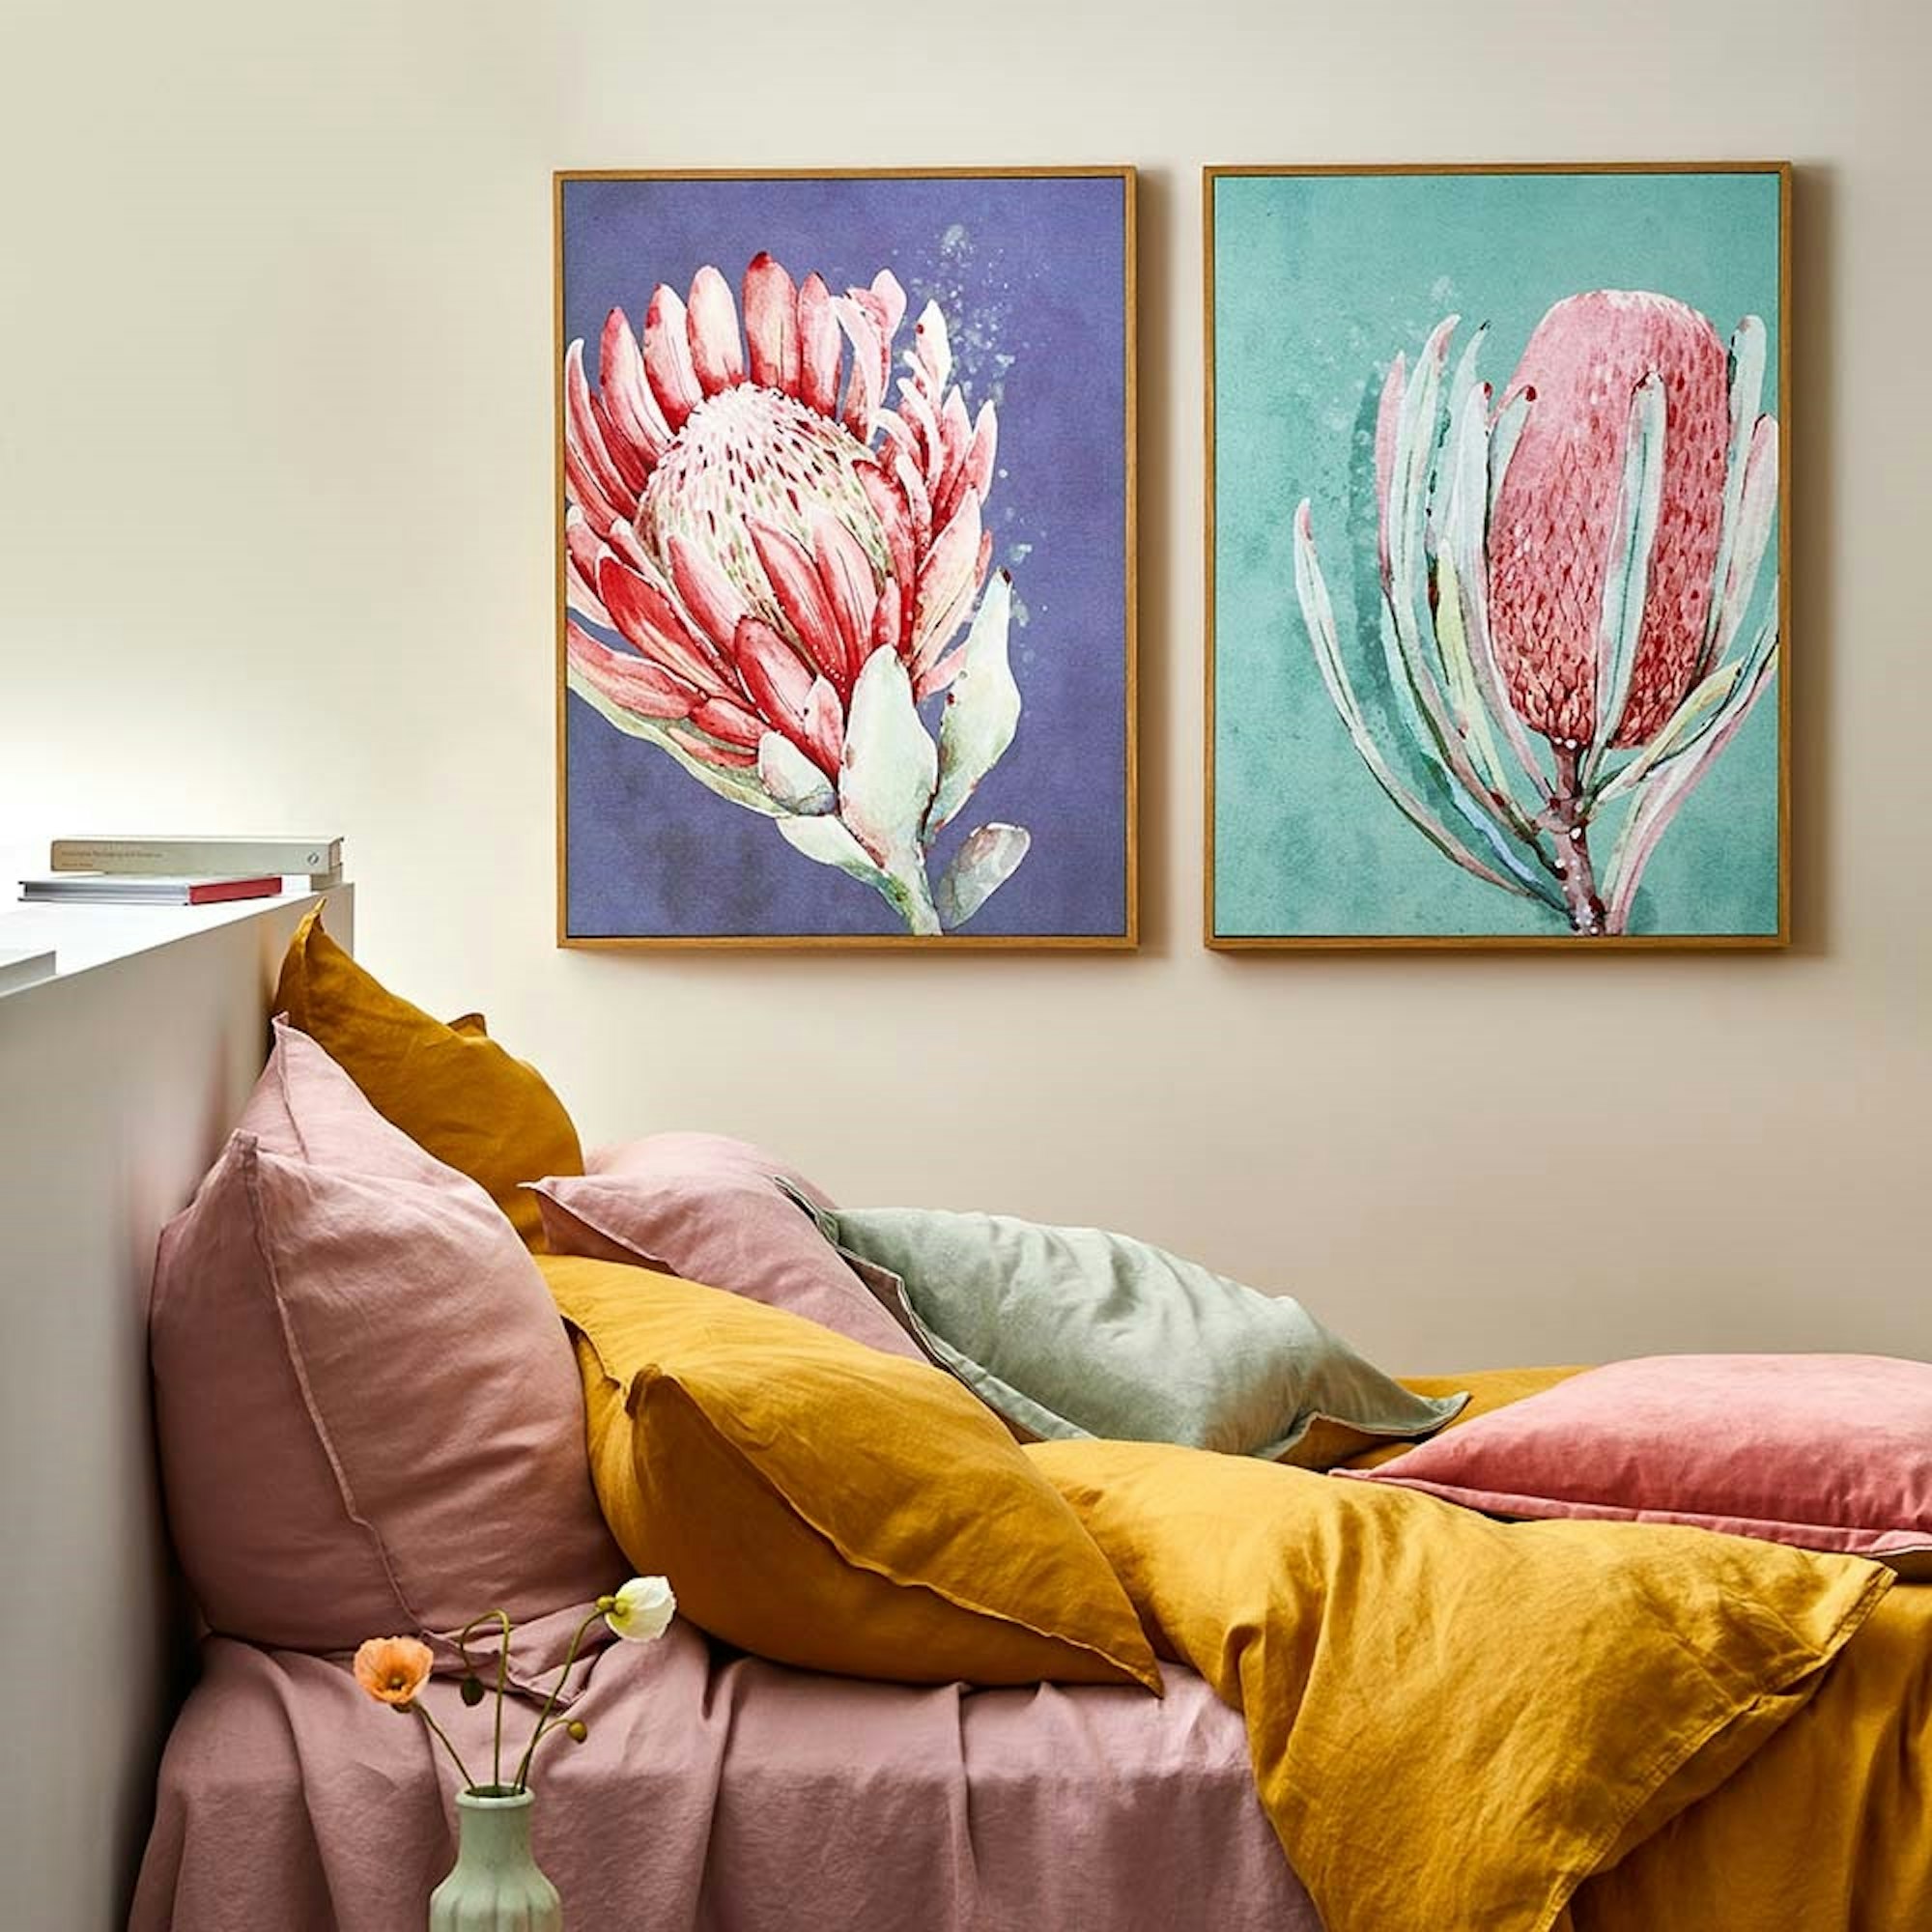 MyHouse colourful bedroom setting with matching native floral canvas wall art